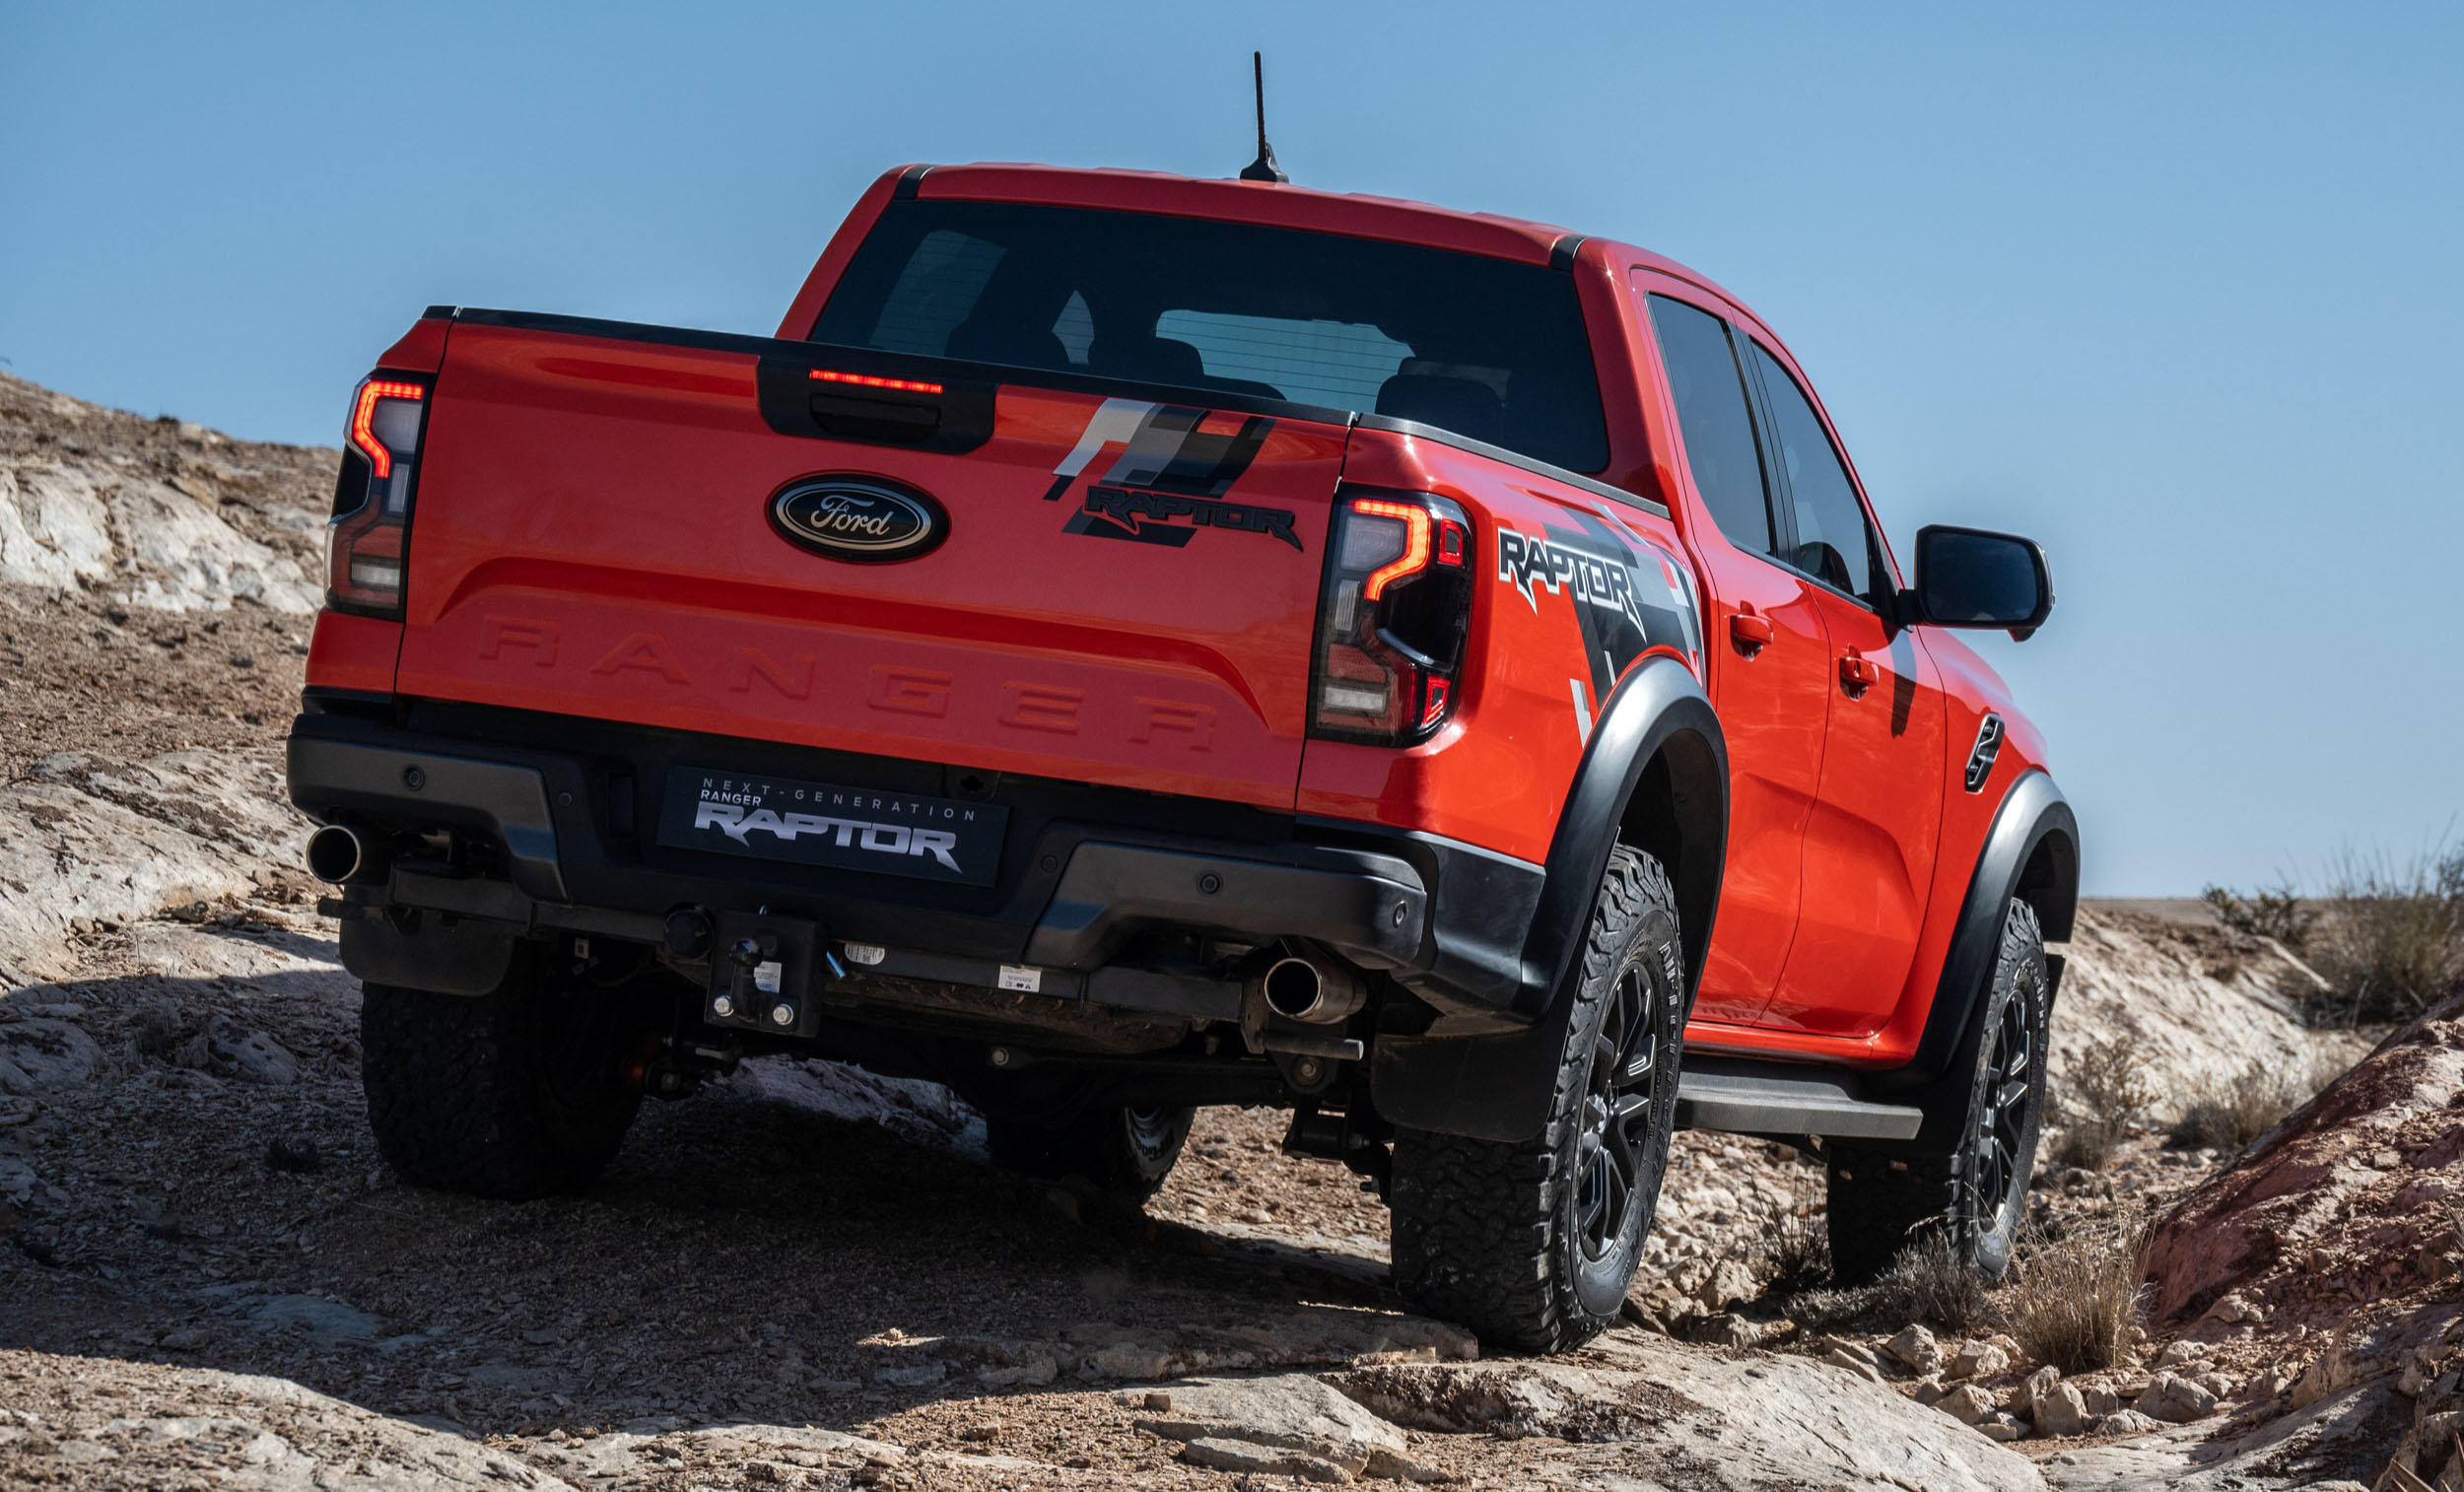 armormax, ford, ford ranger, ford ranger raptor, you can now buy an armoured ford ranger raptor in south africa – pricing